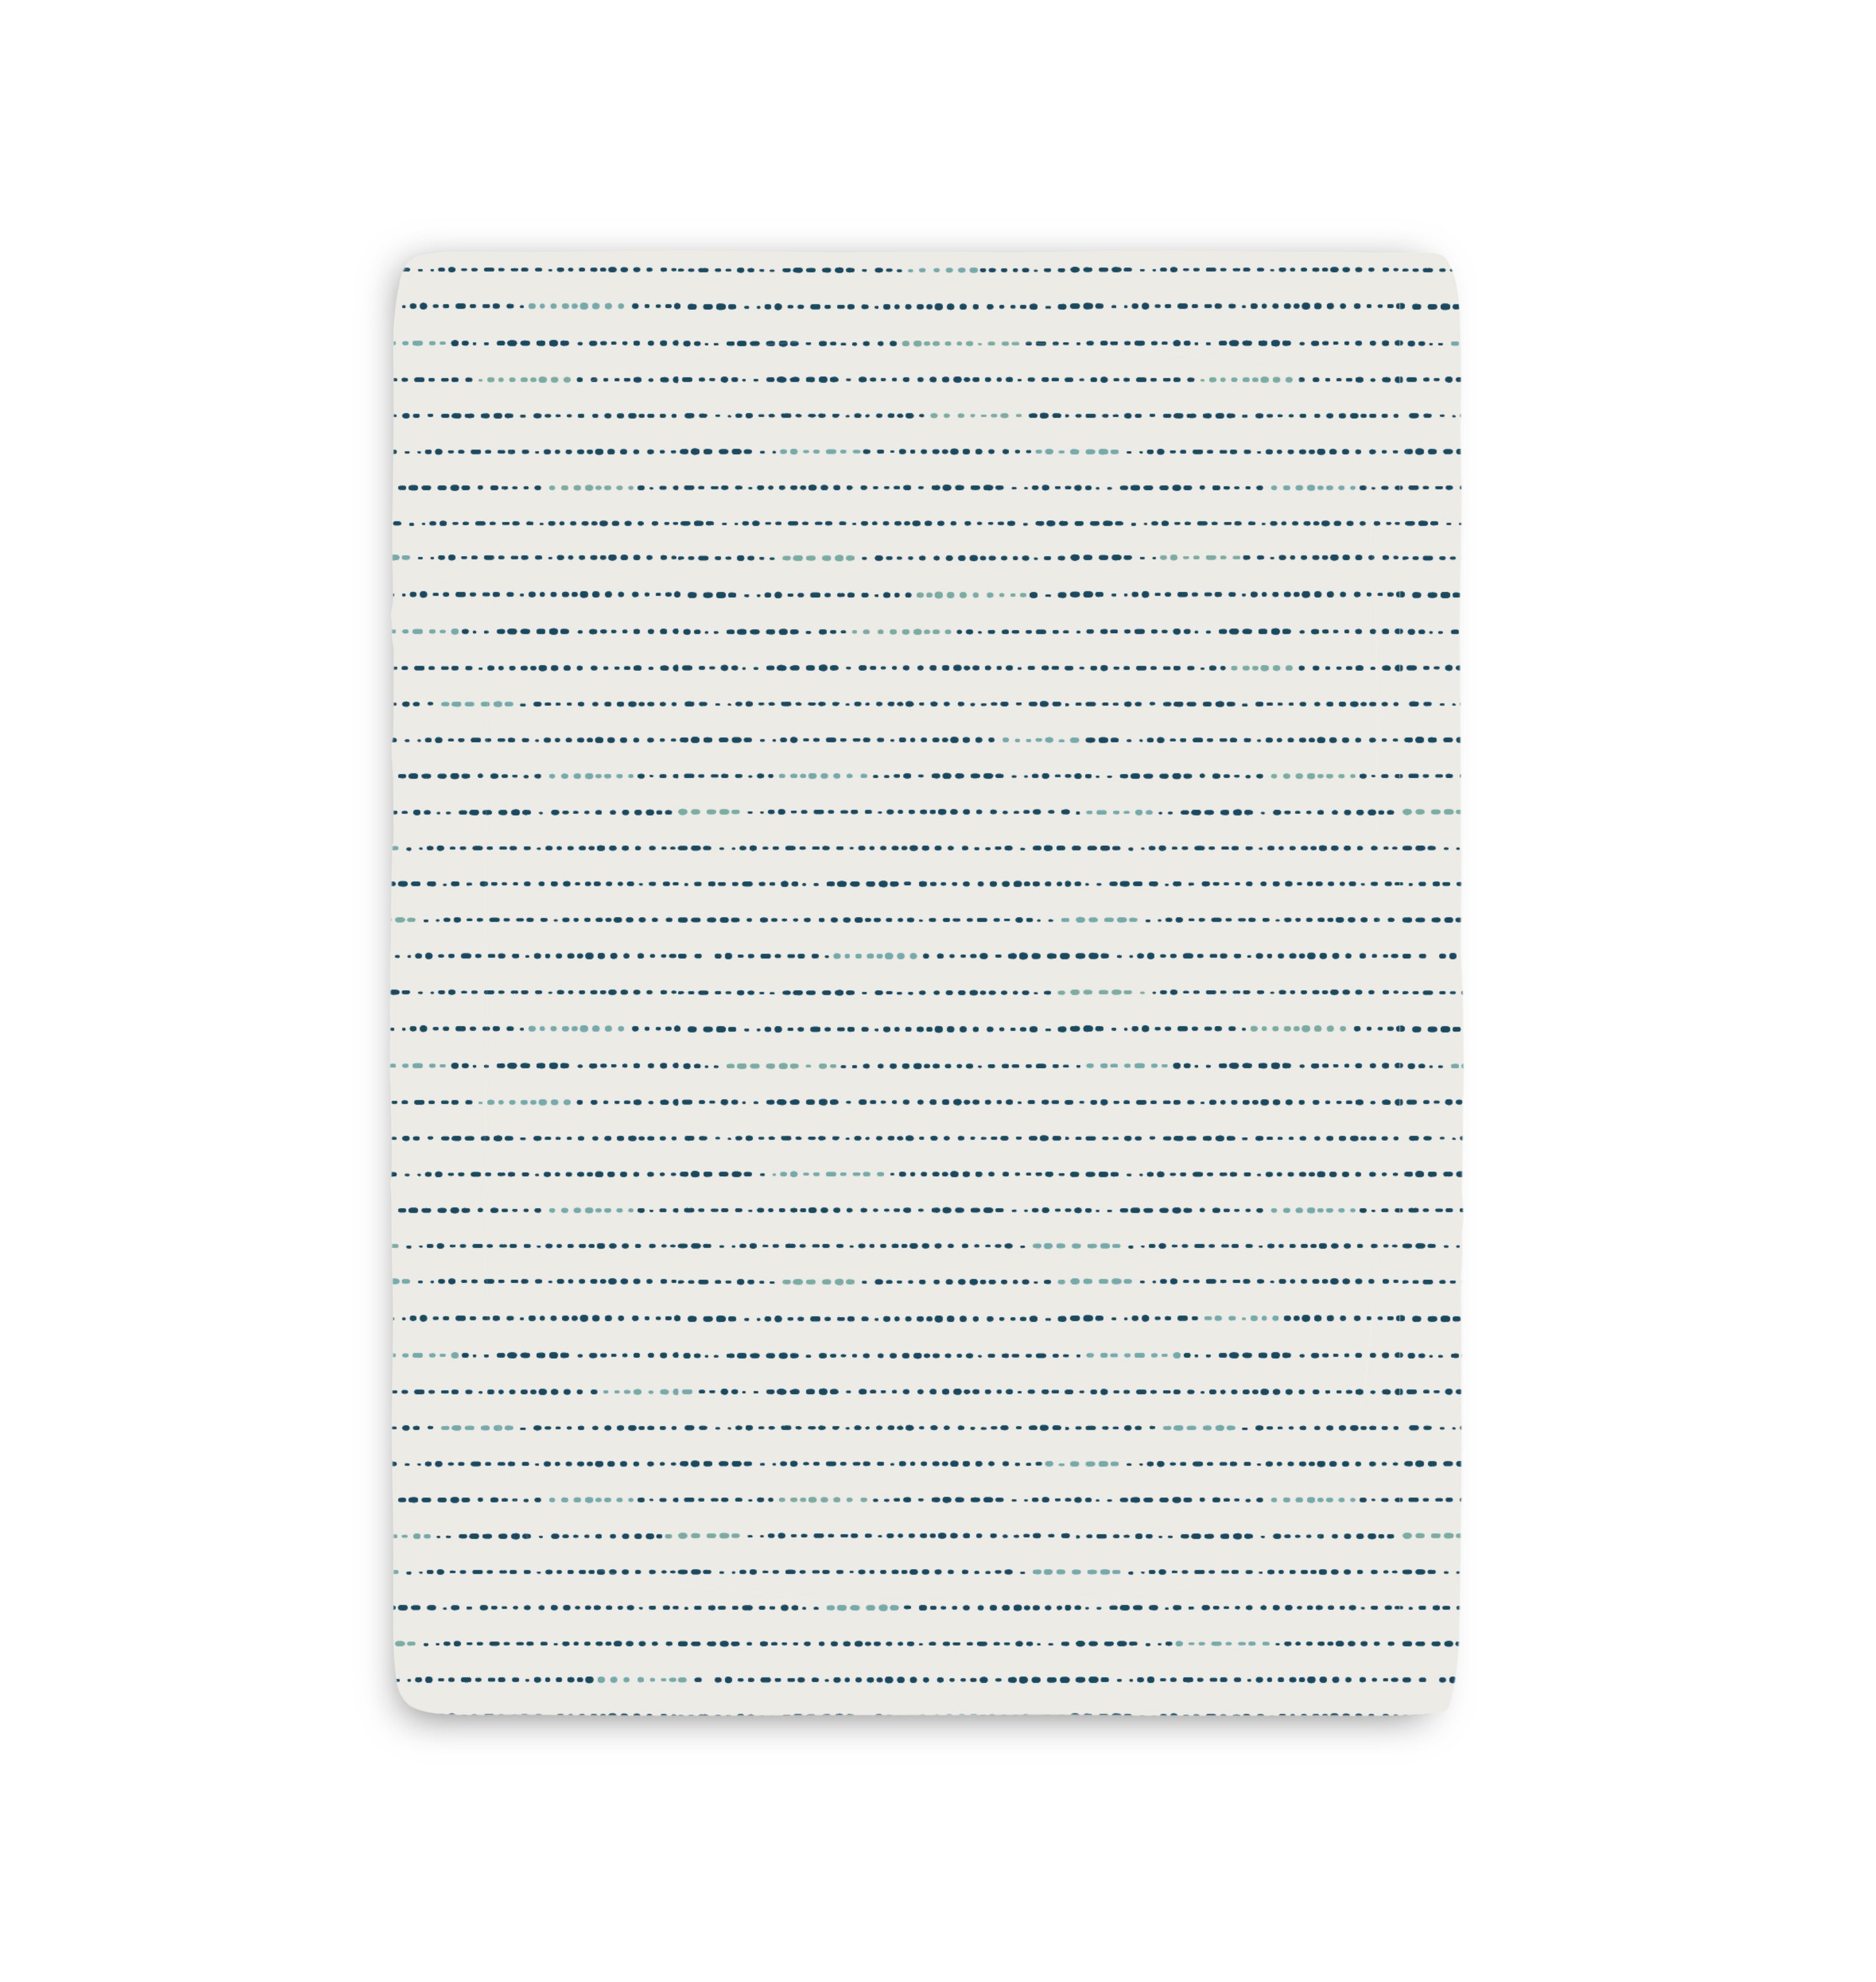 A densely typed document with small, closely spaced black text forming continuous horizontal lines across a white page, with visible texture in the paper. there's a slight shadow on the left side of the Makemake Organics Mini Crib Fitted Sheet - Pebble.